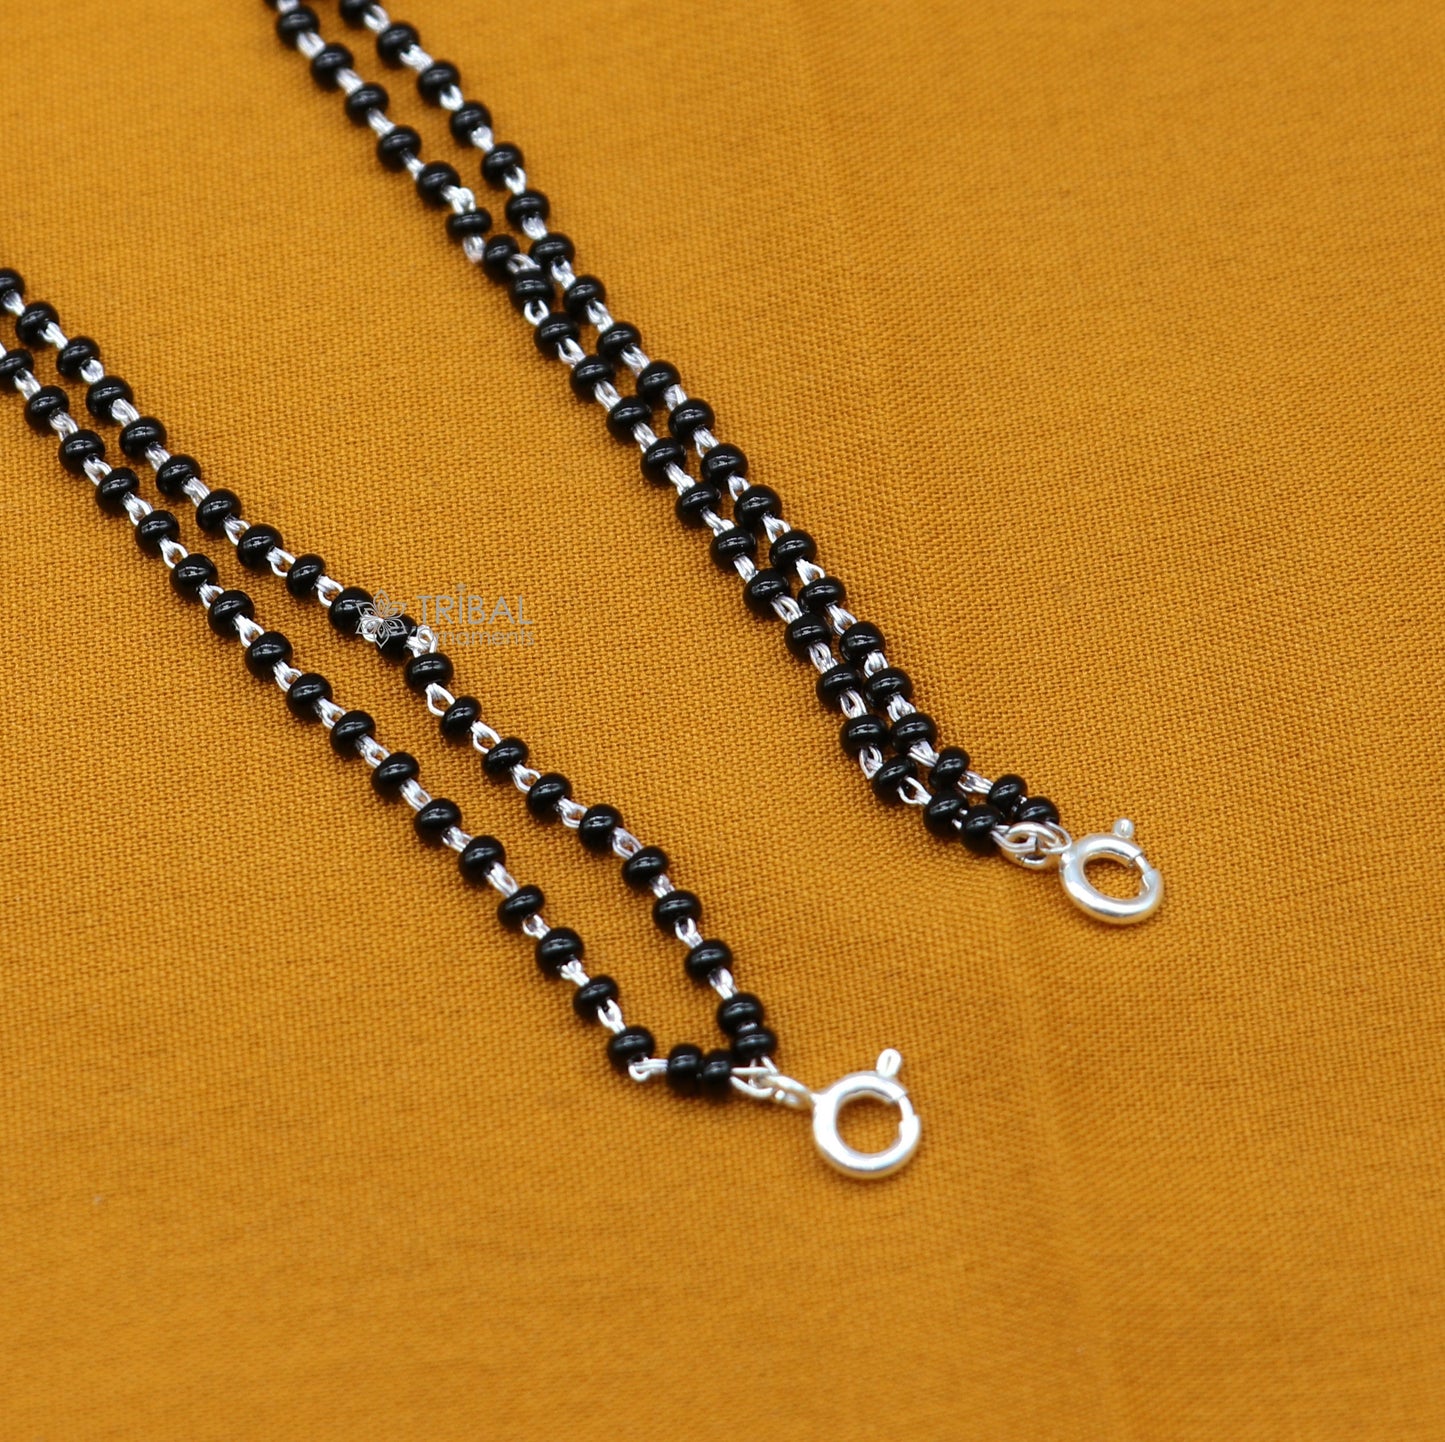 925 sterling silver 2.2mm black beads 2 line chain, vintage Cultural fancy necklace, traditional style brides Mangalsutra chain India ch571 - TRIBAL ORNAMENTS